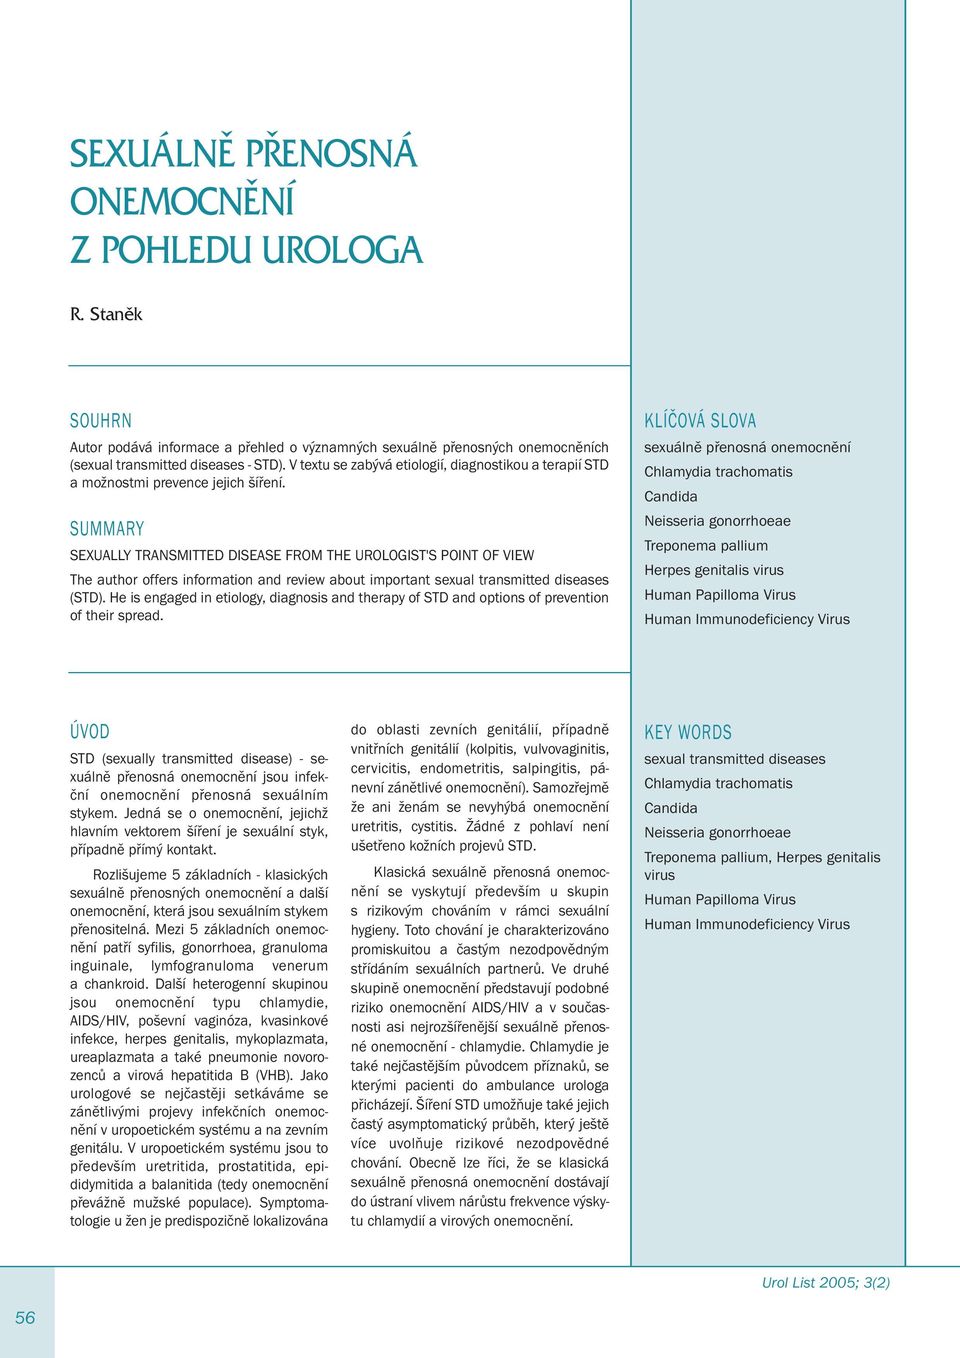 SUMMARY SEXUALLY TRANSMITTED DISEASE FROM THE UROLOGIST'S POINT OF VIEW The author offers information and review about important sexual transmitted diseases (STD).